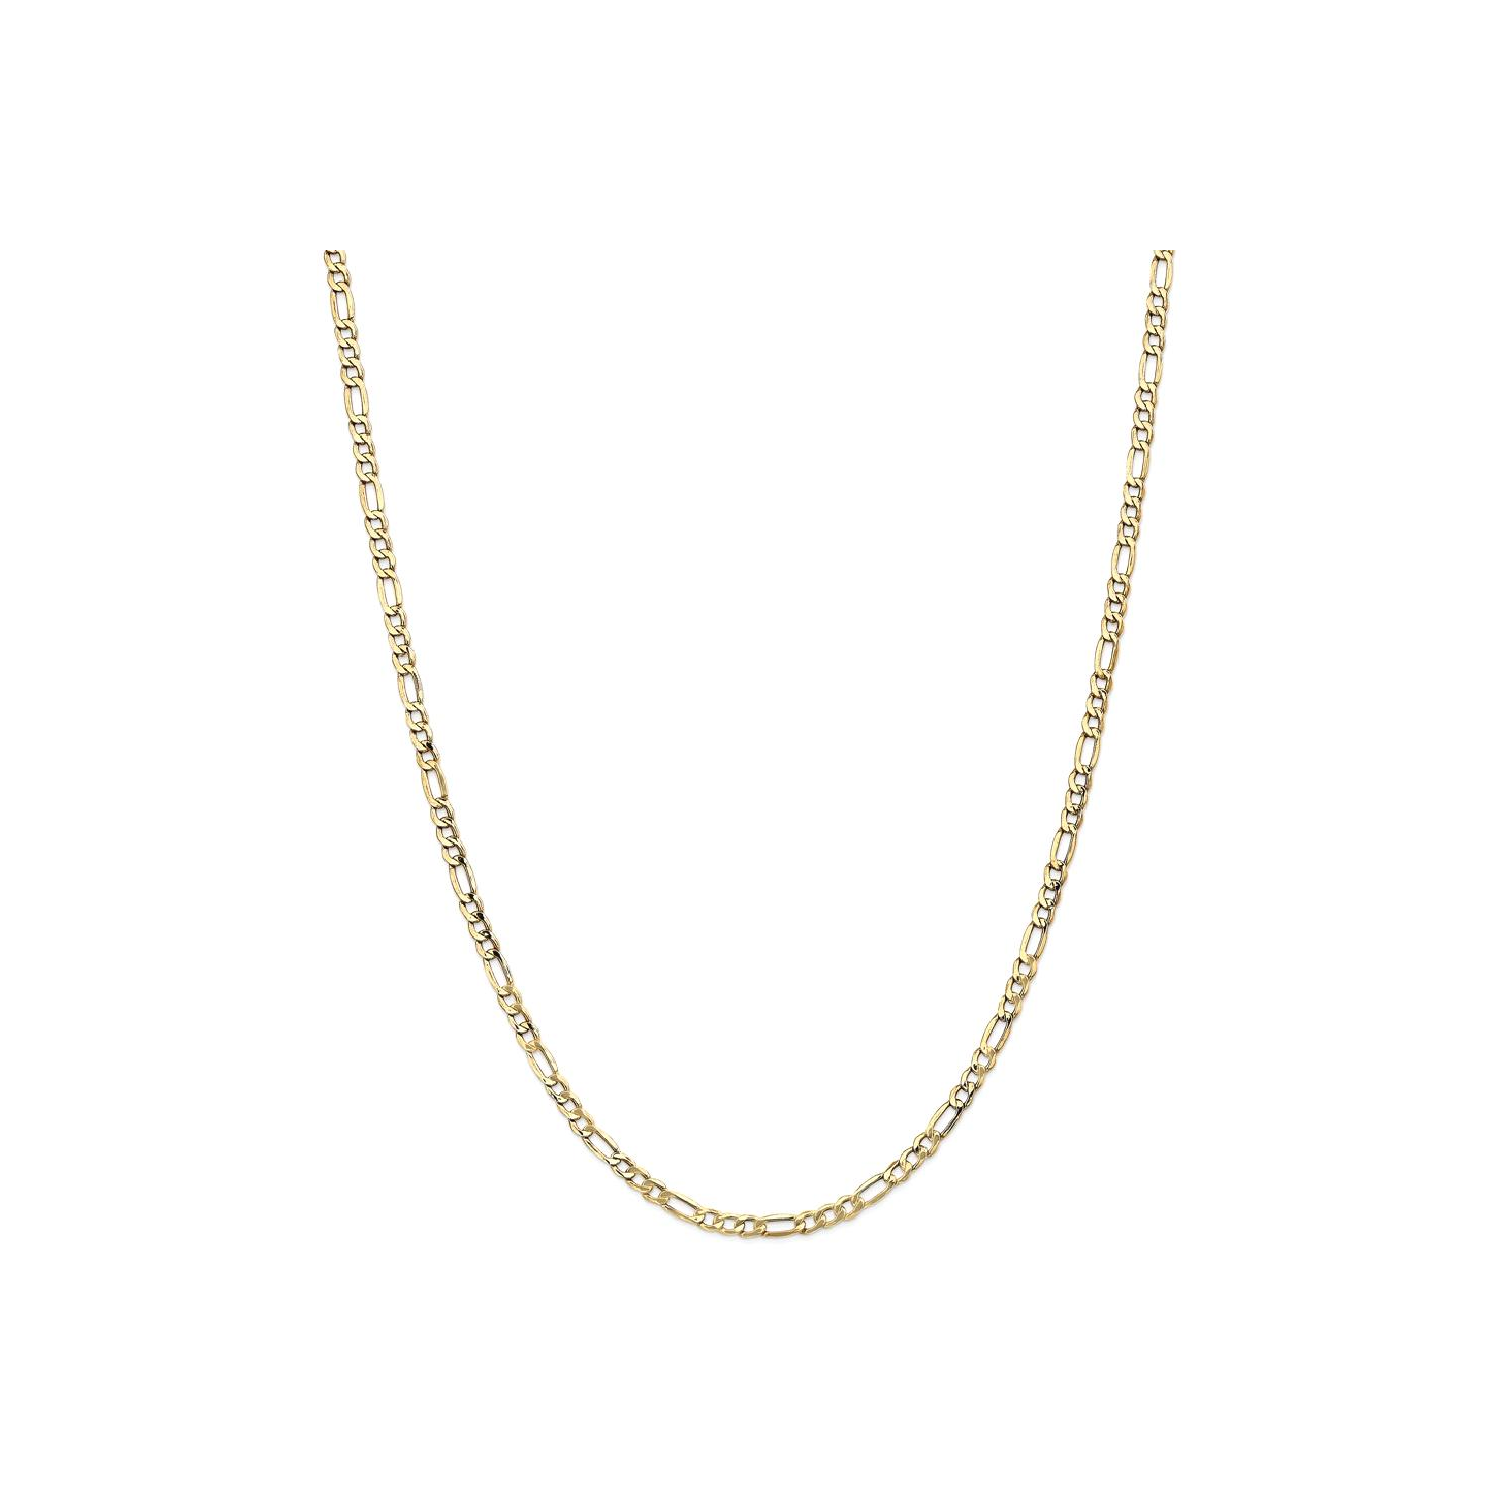 IceCarats 14k Yellow Gold 3.5mm Link Figaro Chain Necklace 20 Inch